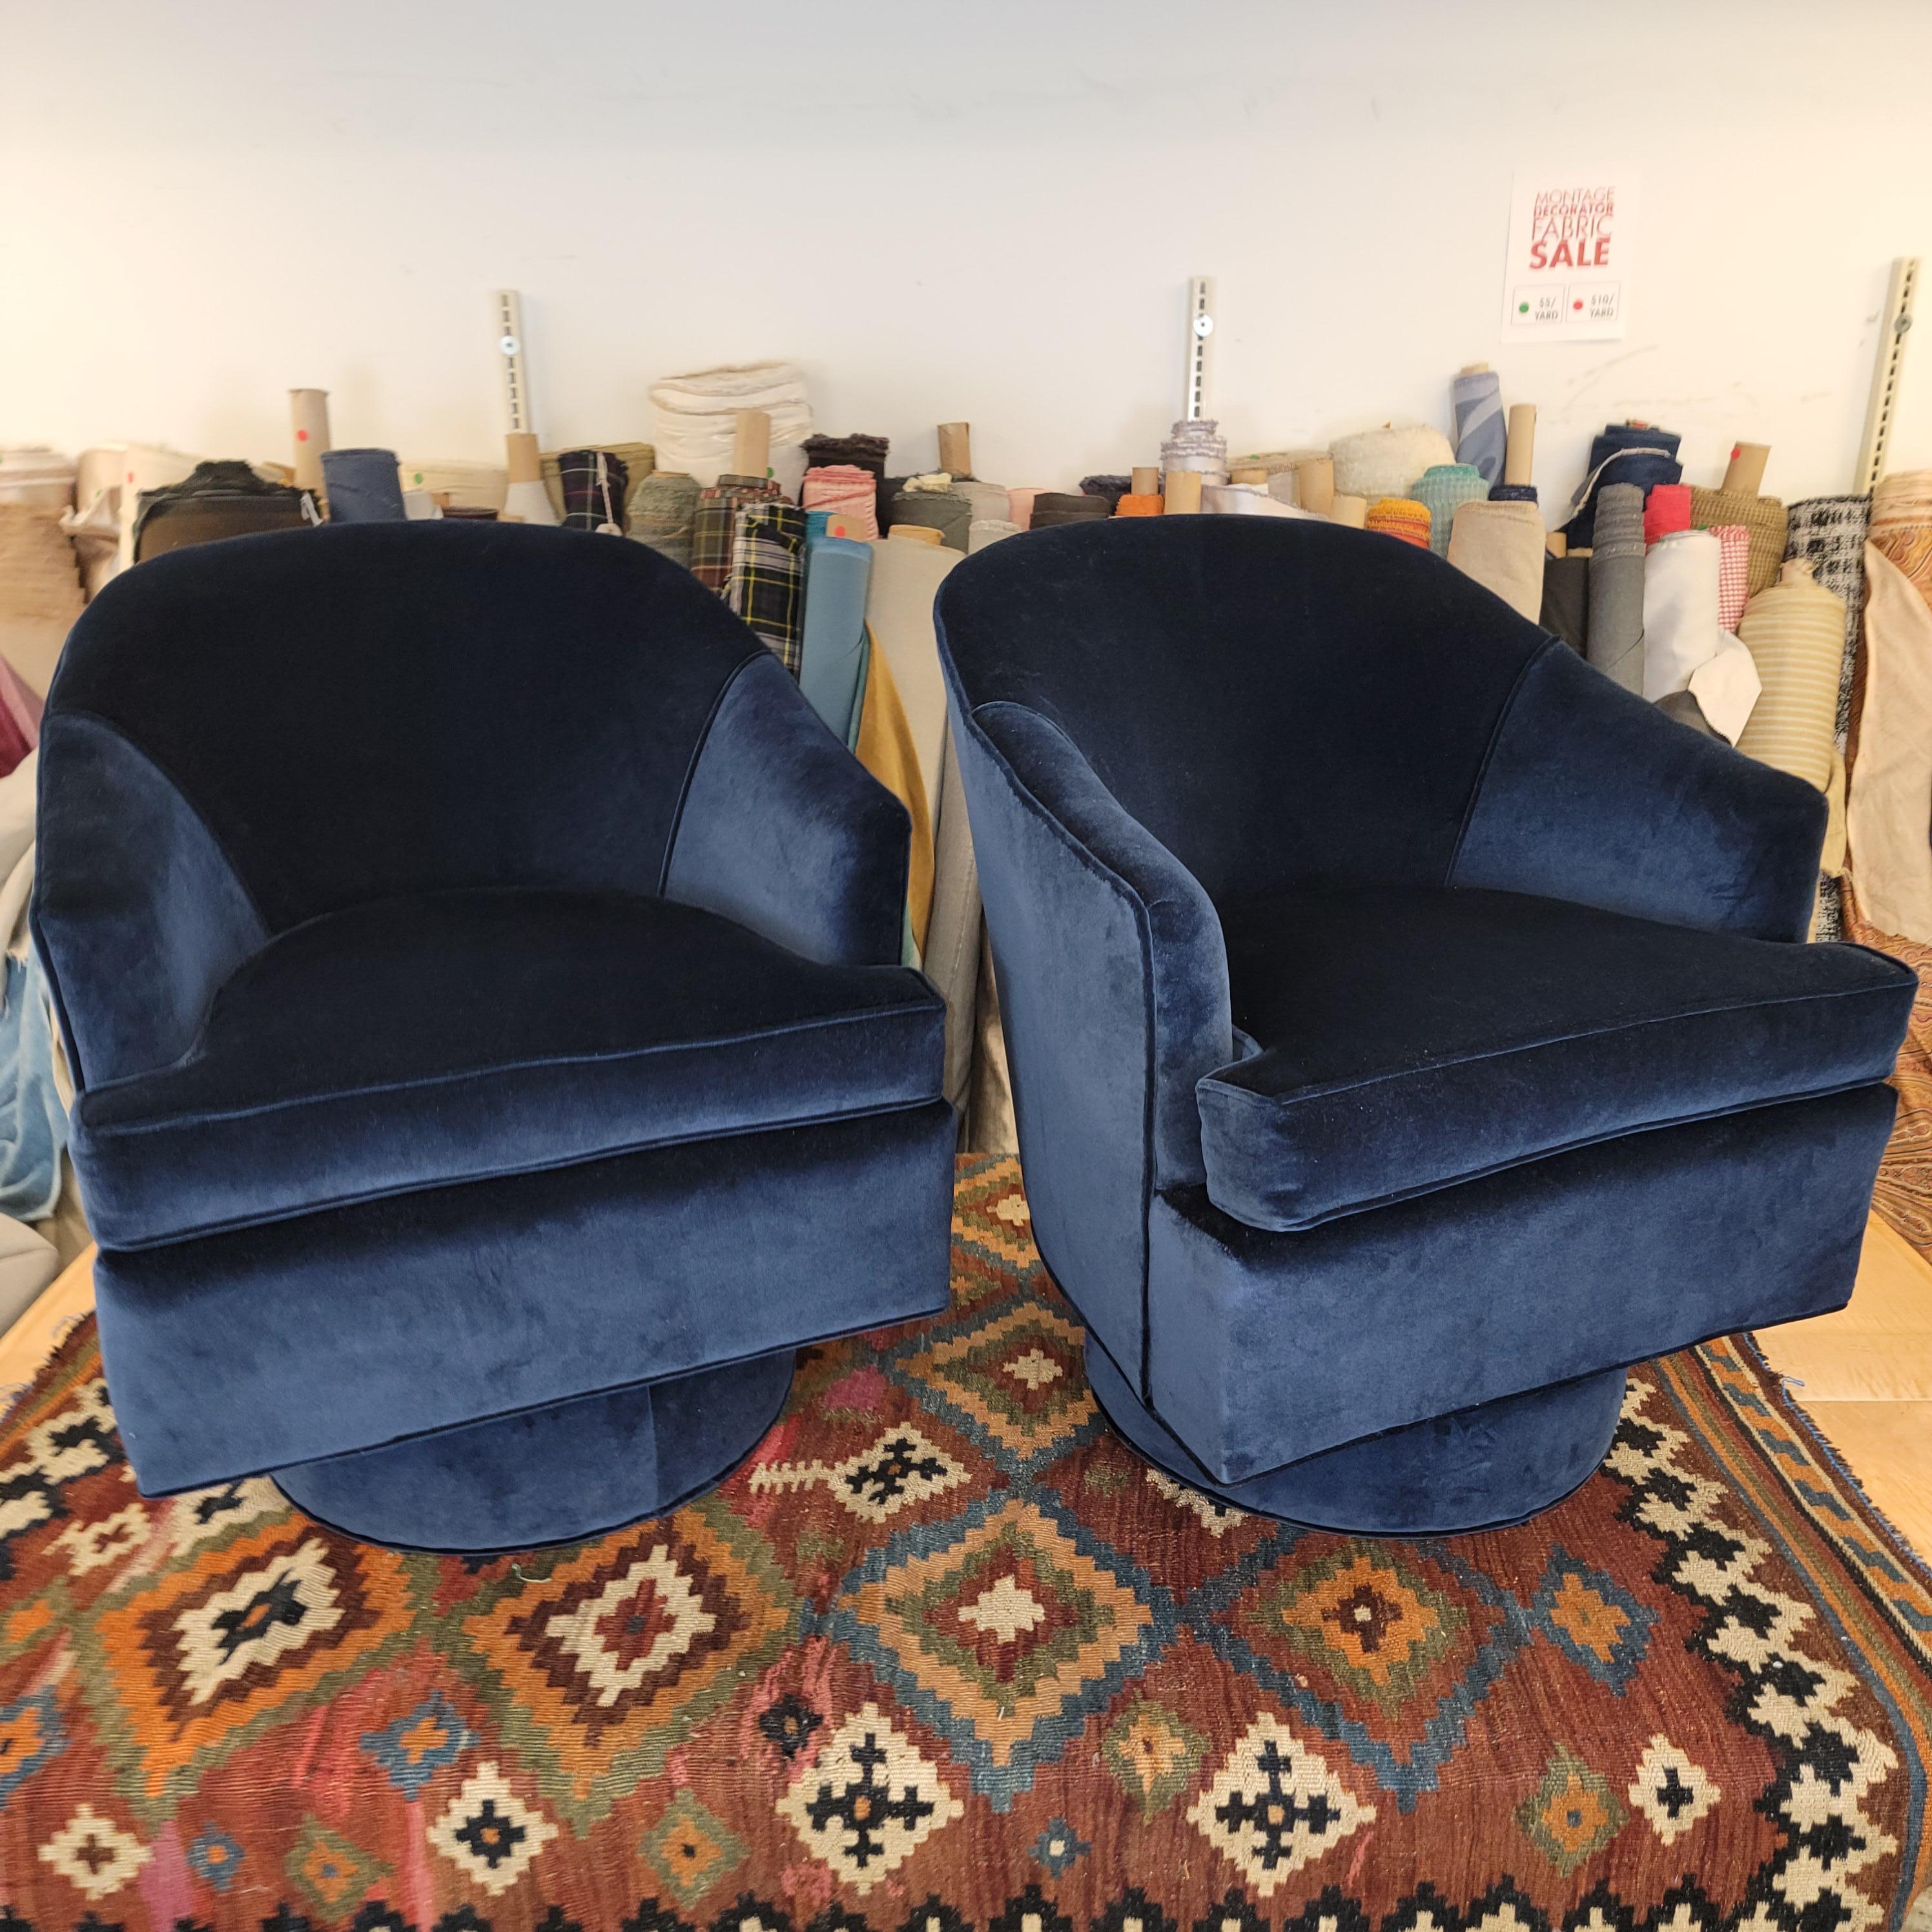 The tapered back and sophisticated tapered arms set these swivel tub chairs apart from the pack. Reupholstered in navy velvet, a timelessly bold color and reequipped with a heightened base which makes the chair a breeze going up or down. Swivel tub